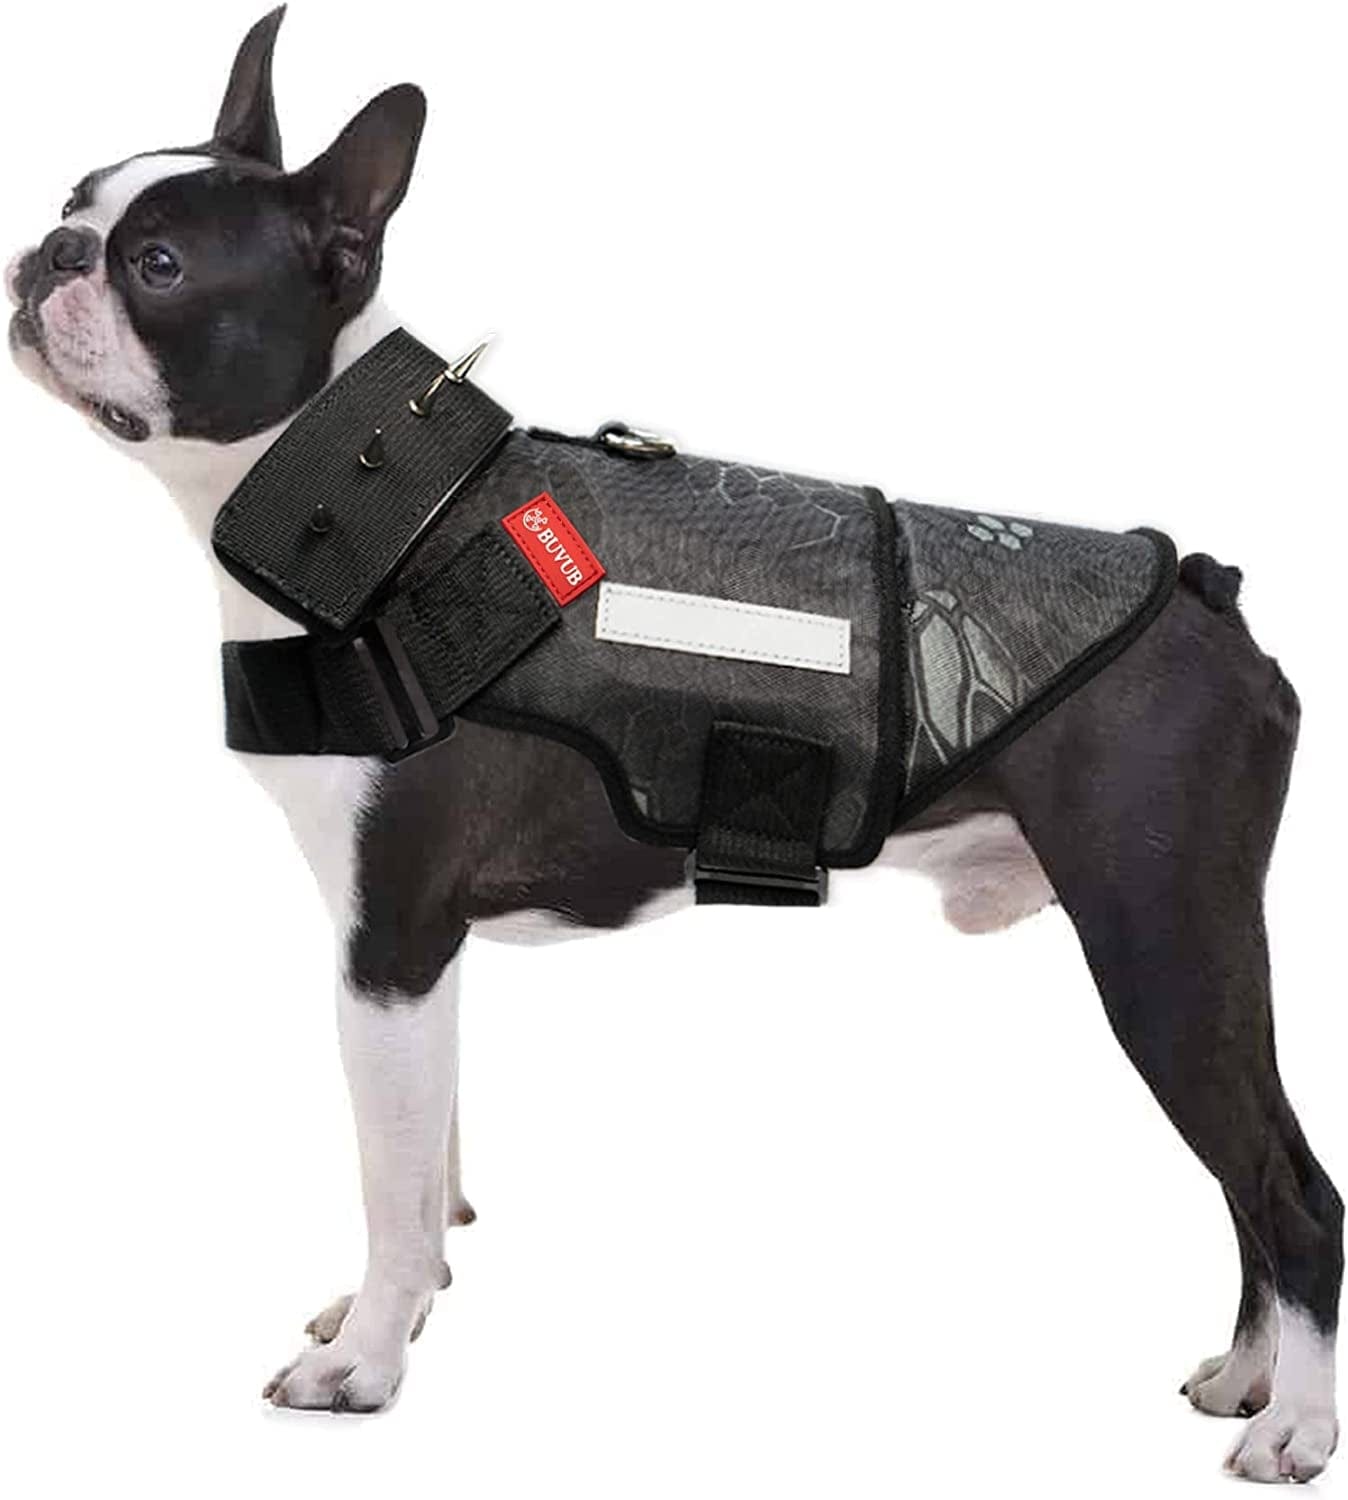 What is a Coyote Vest? How does it protect a dog?